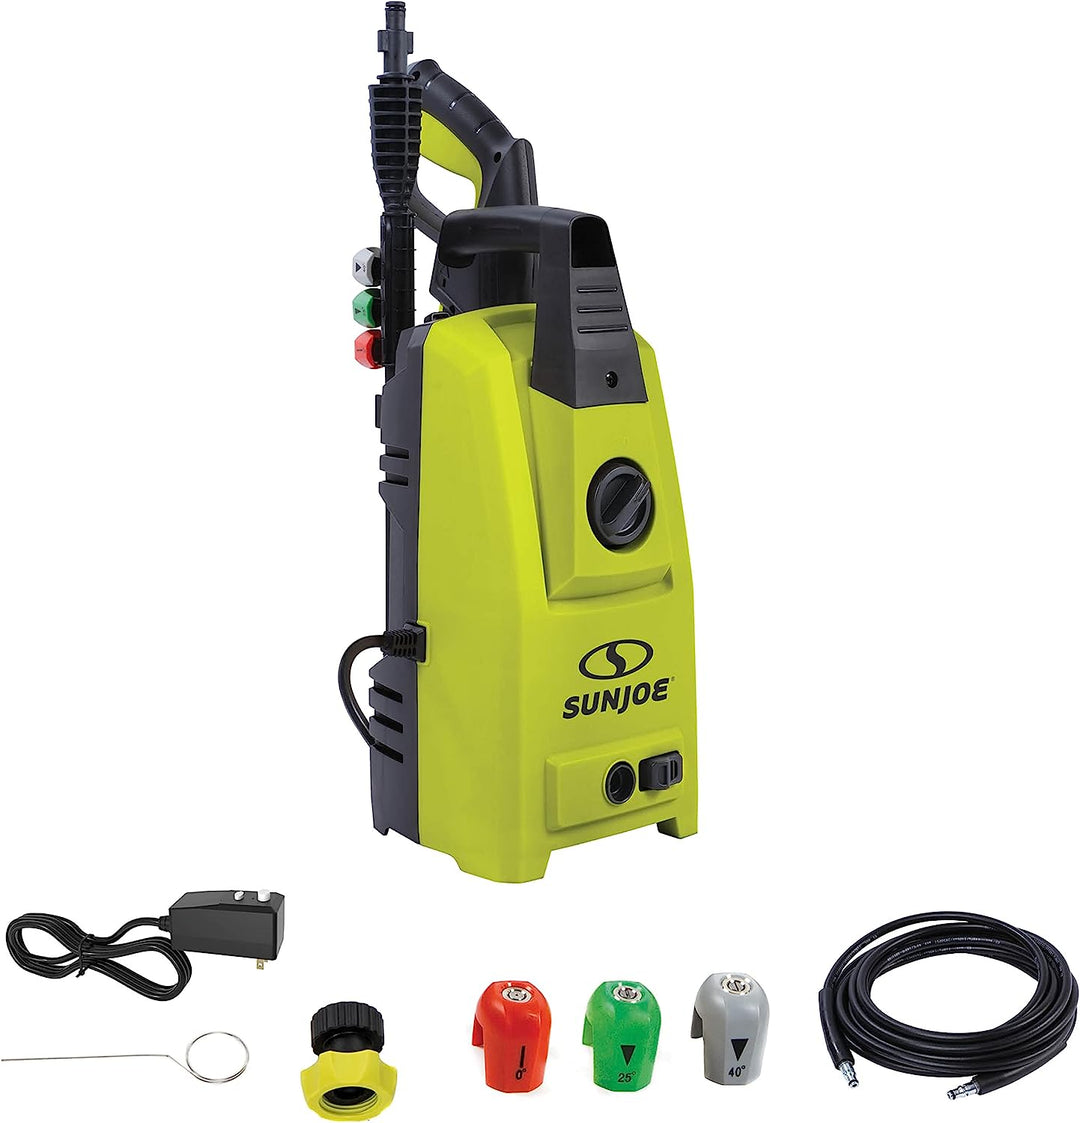 Restored Scratch and Dent 10.5-Amp 1500 Max-PSI Electric Pressure Washer w/3-QC Tips, Detergent Bottle (Refurbished)